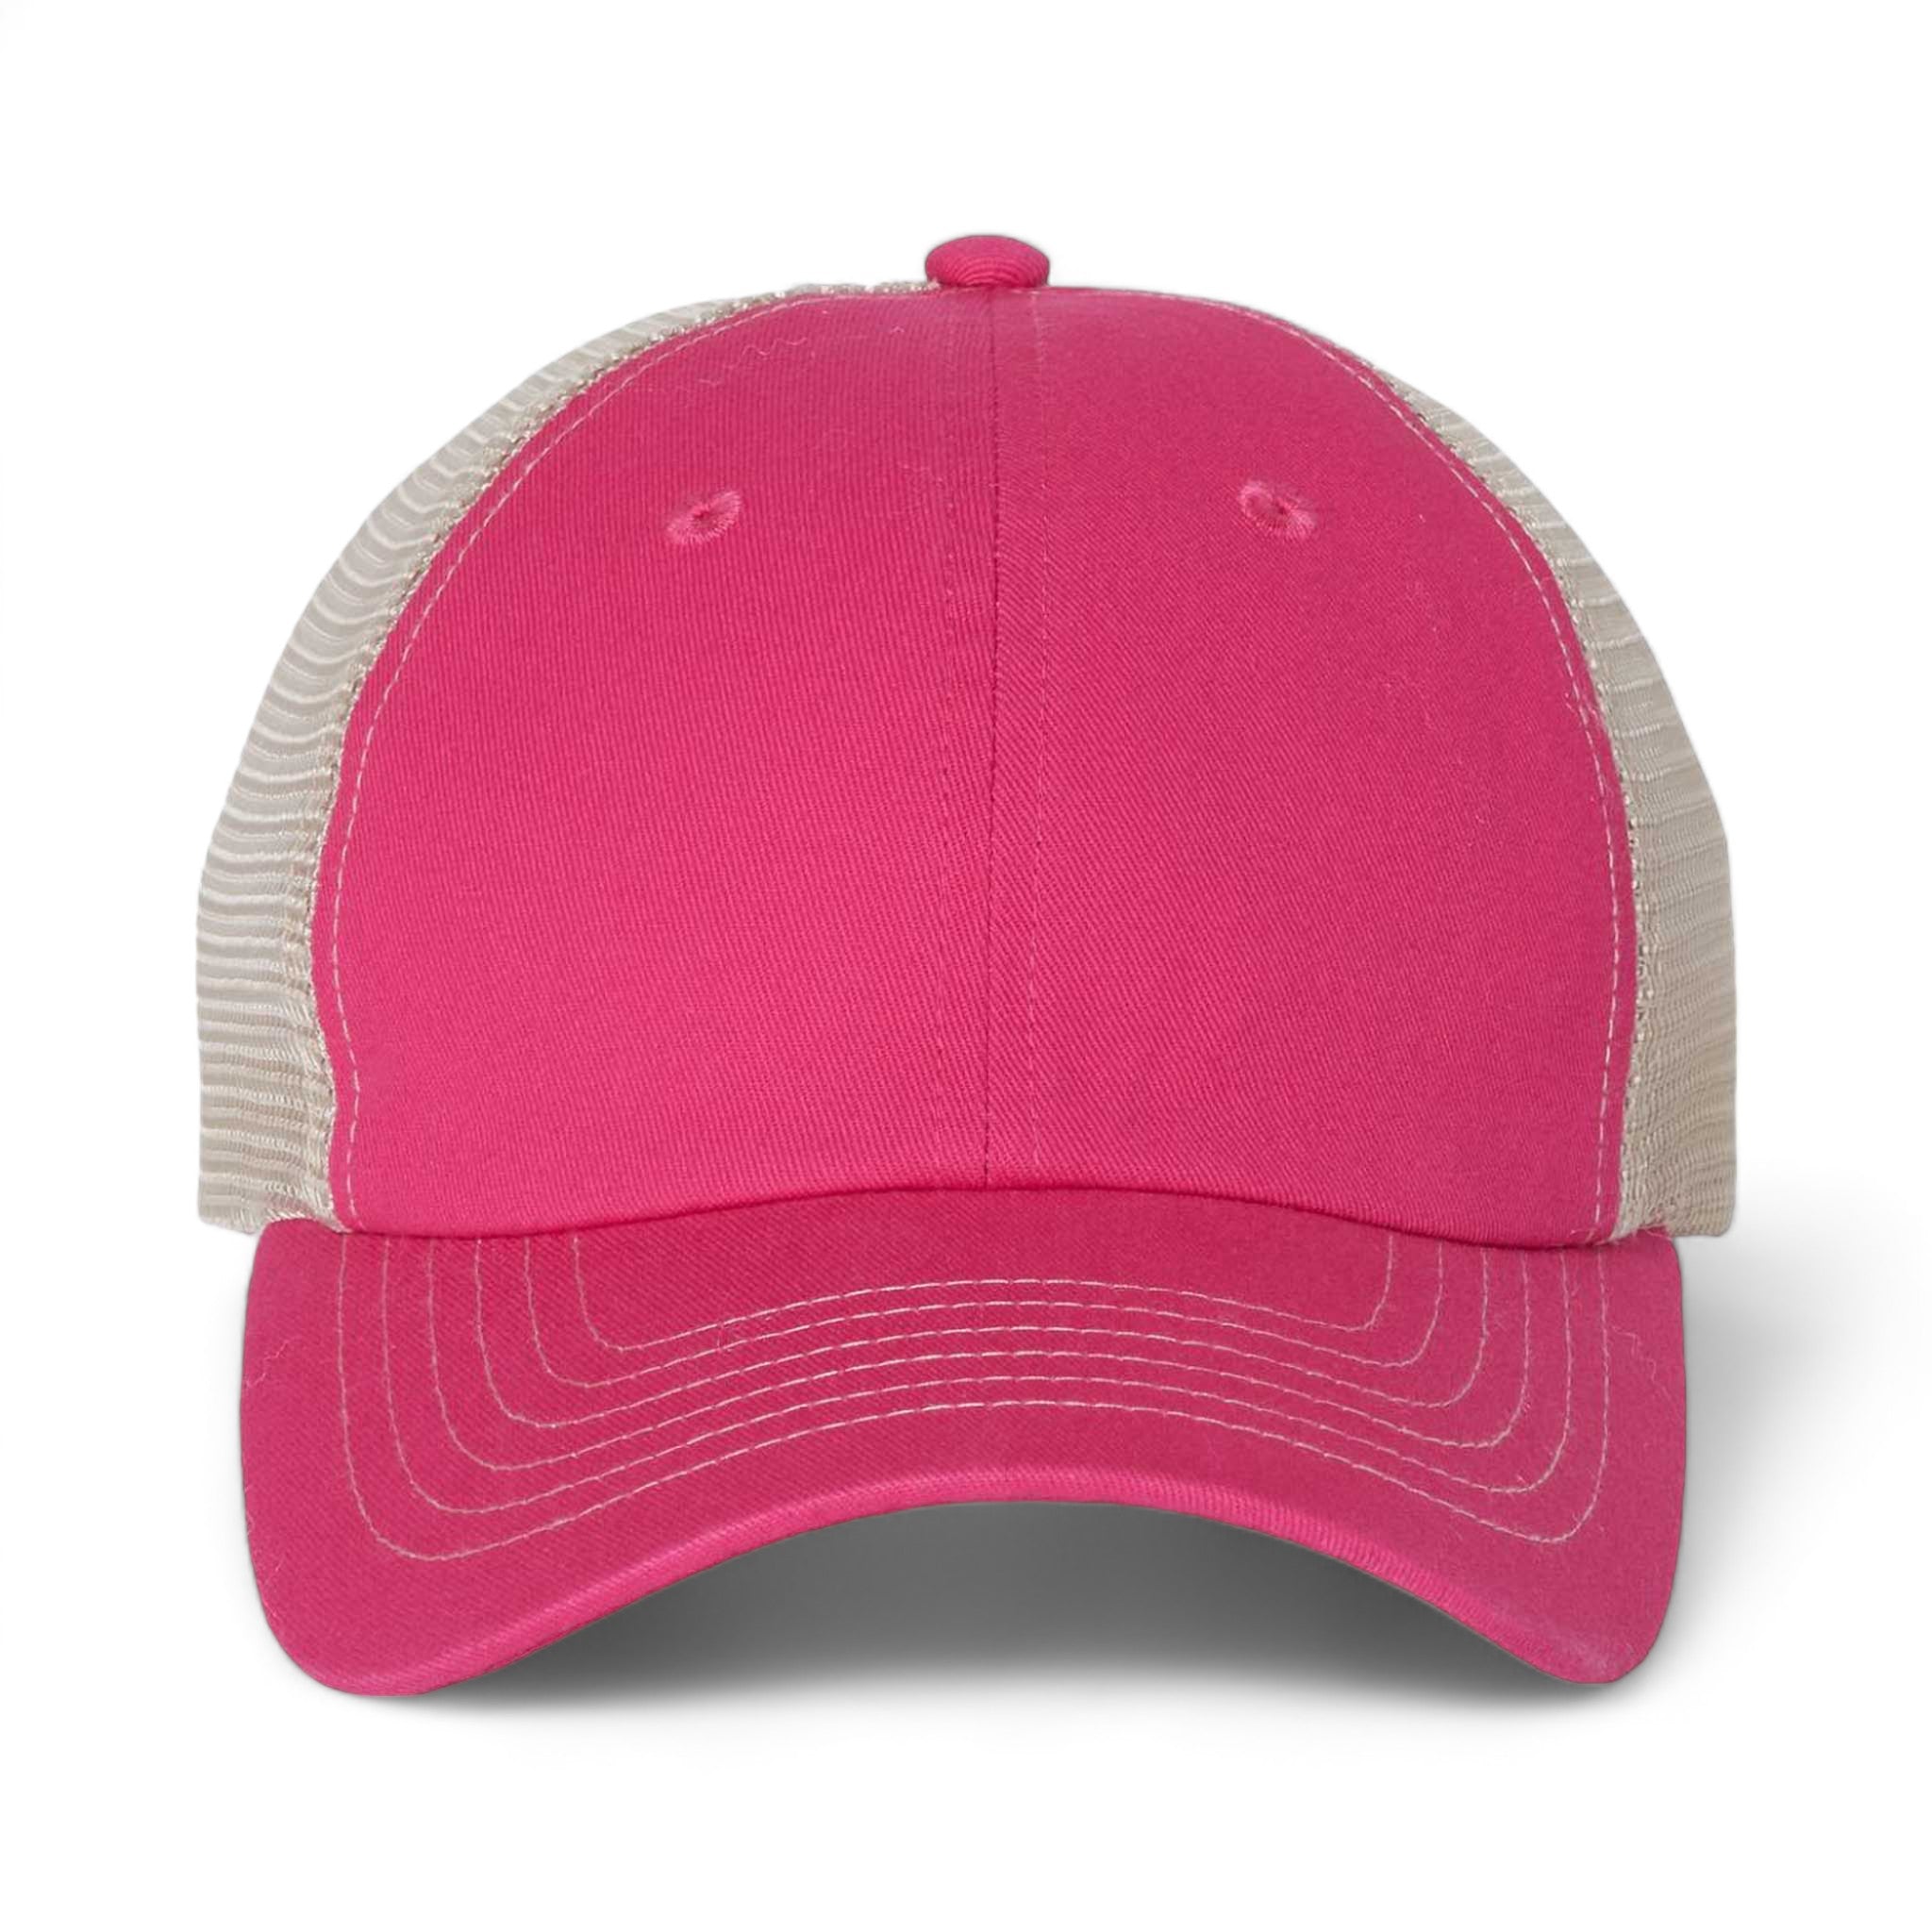 Front view of Sportsman 3100 custom hat in pink and stone